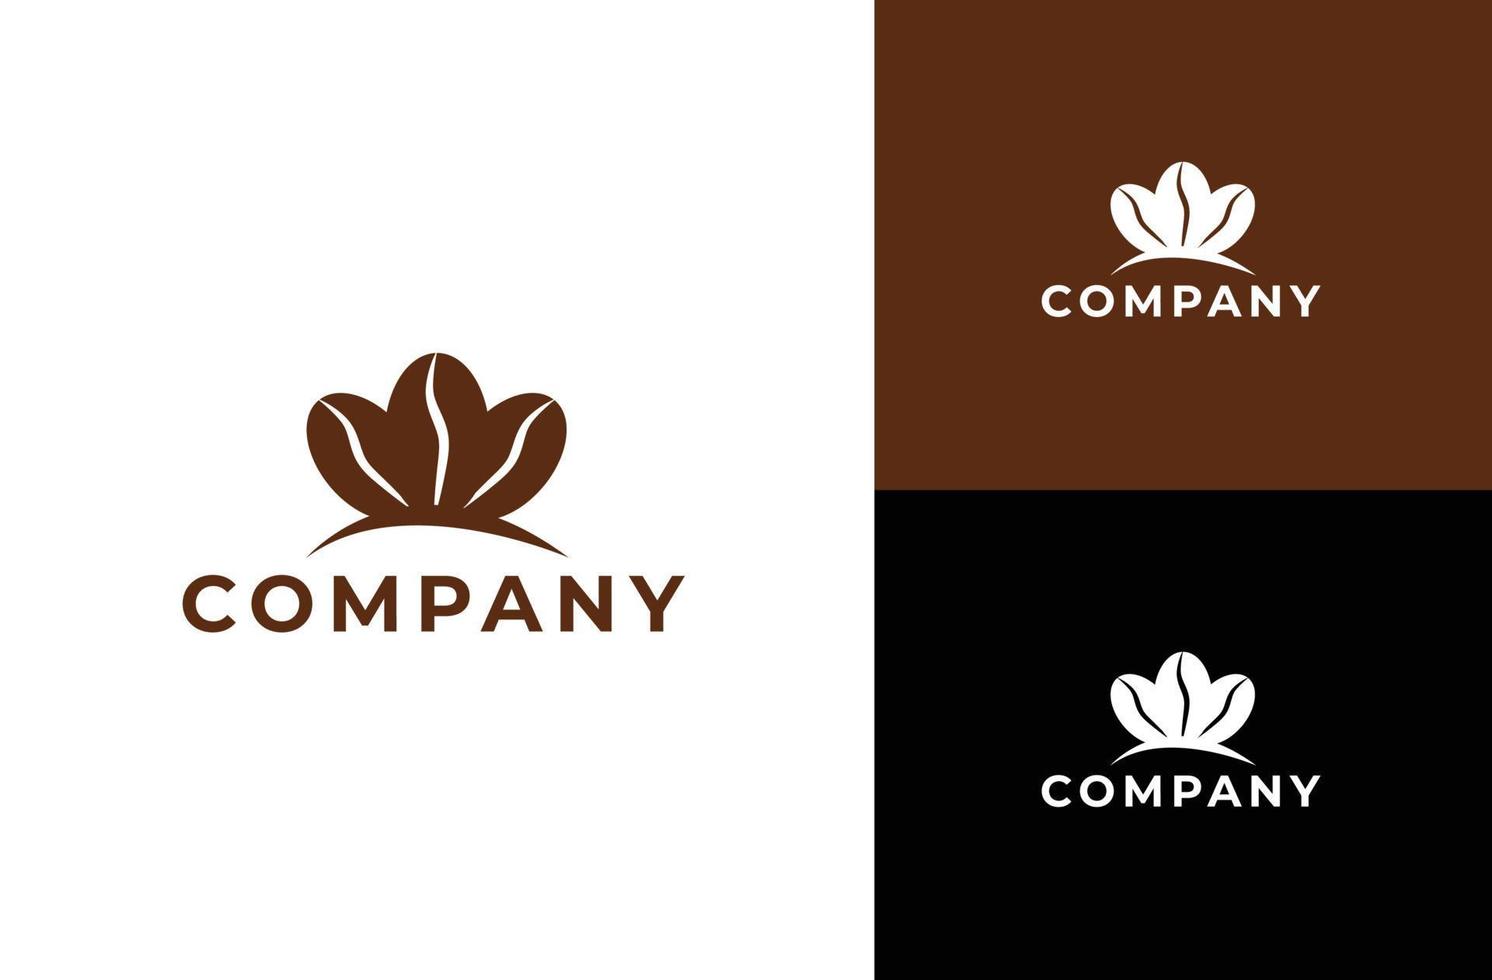 vector coffee beans template vector icon illustration